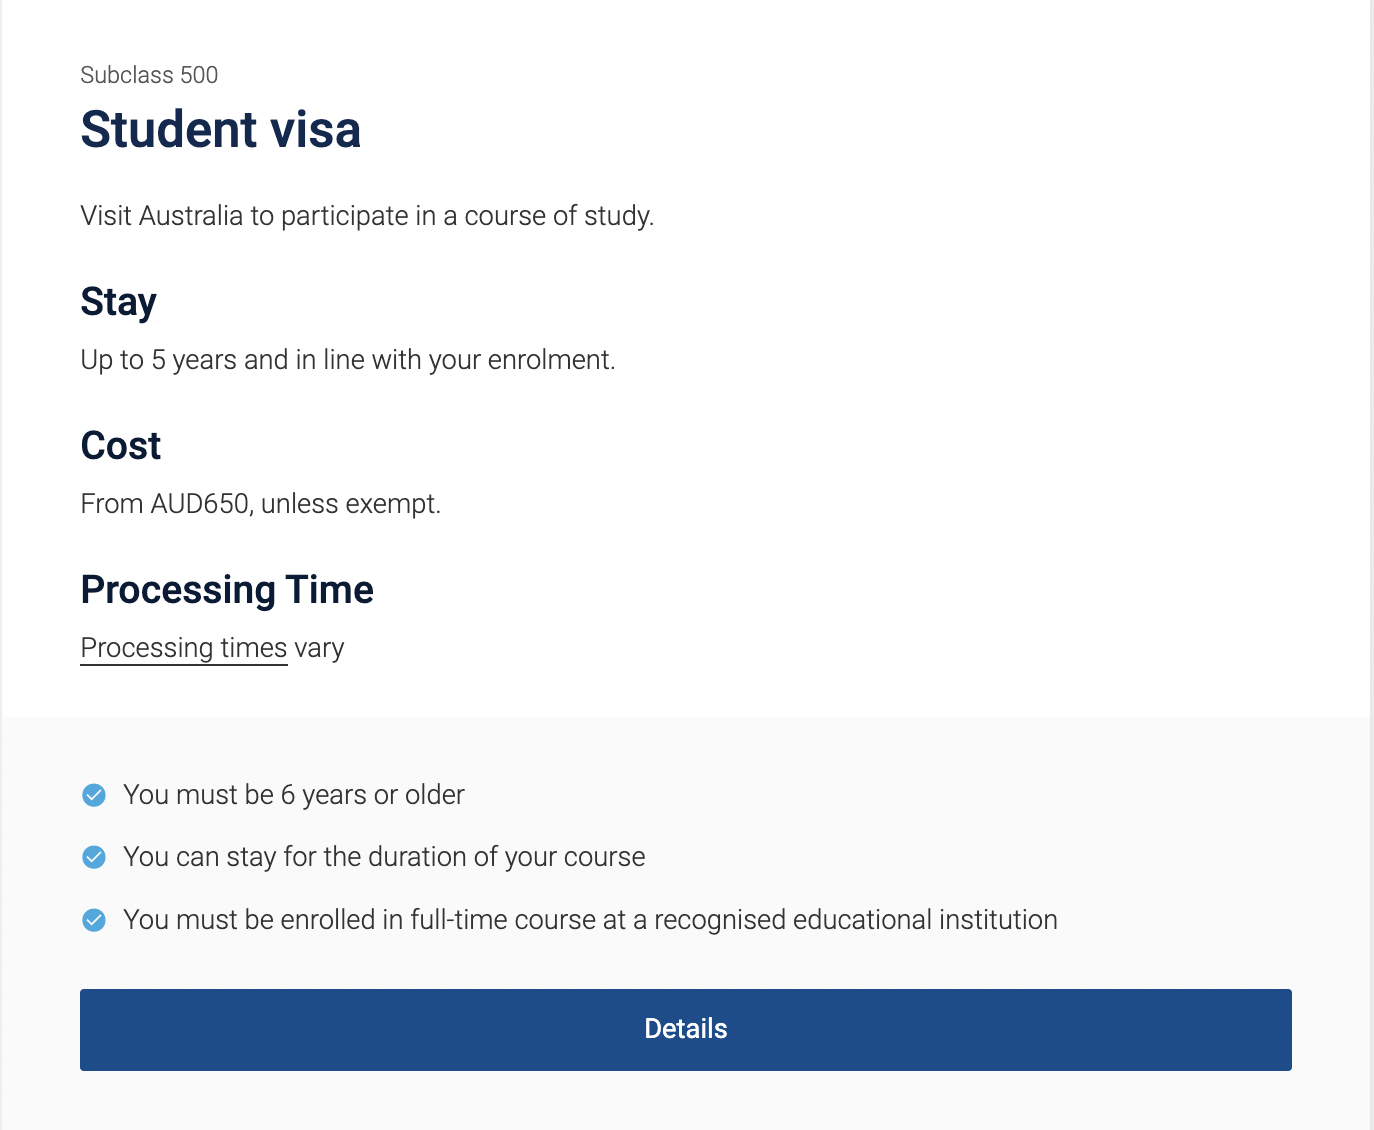 Student Visa for Australia - Subclass, Rules, Requirements, Application, Fees